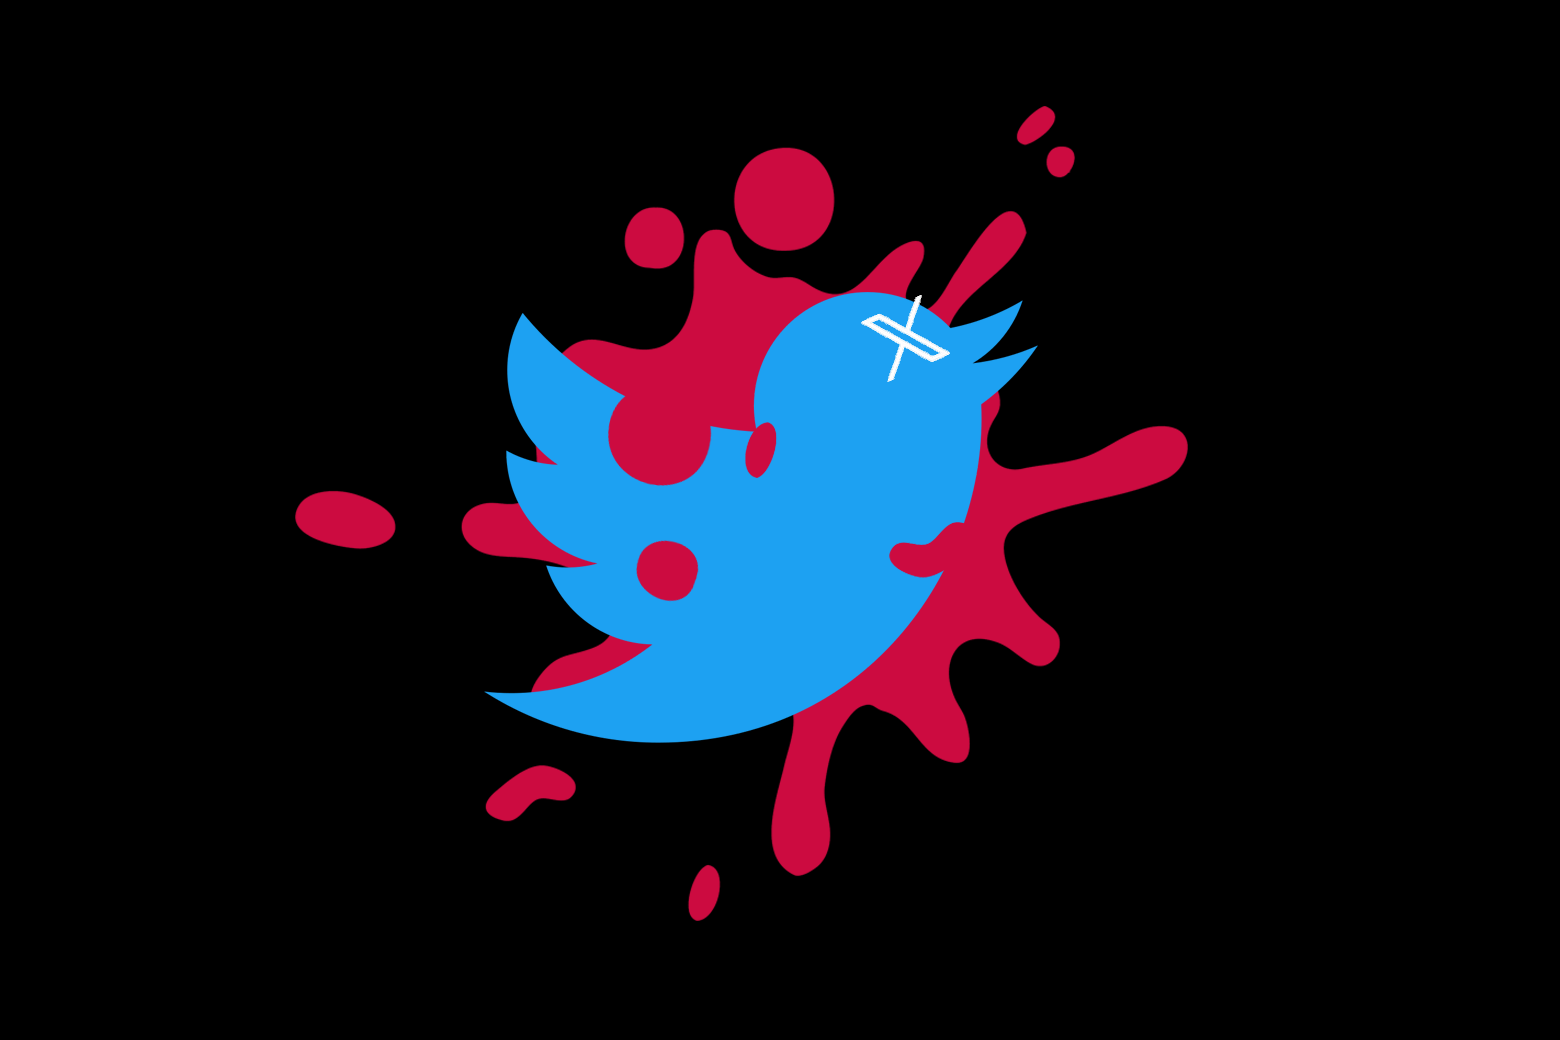 The blue Twitter bird seen in a red splat on a black background, with Unicode X's for eyes.